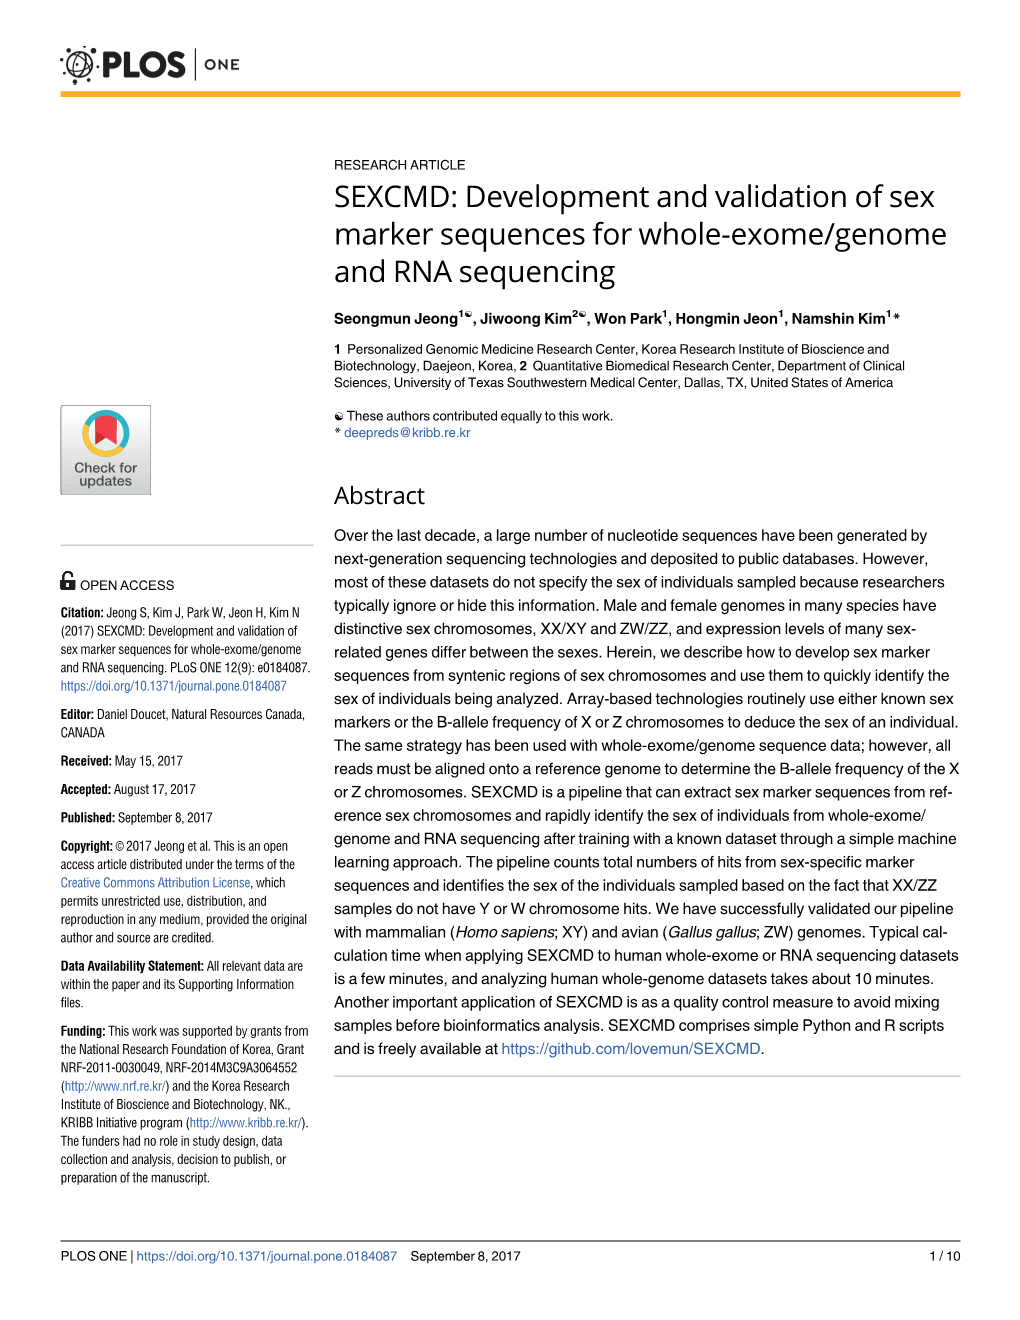 Development and Validation of Sex Marker Sequences for Whole-Exome/Genome and RNA Sequencing